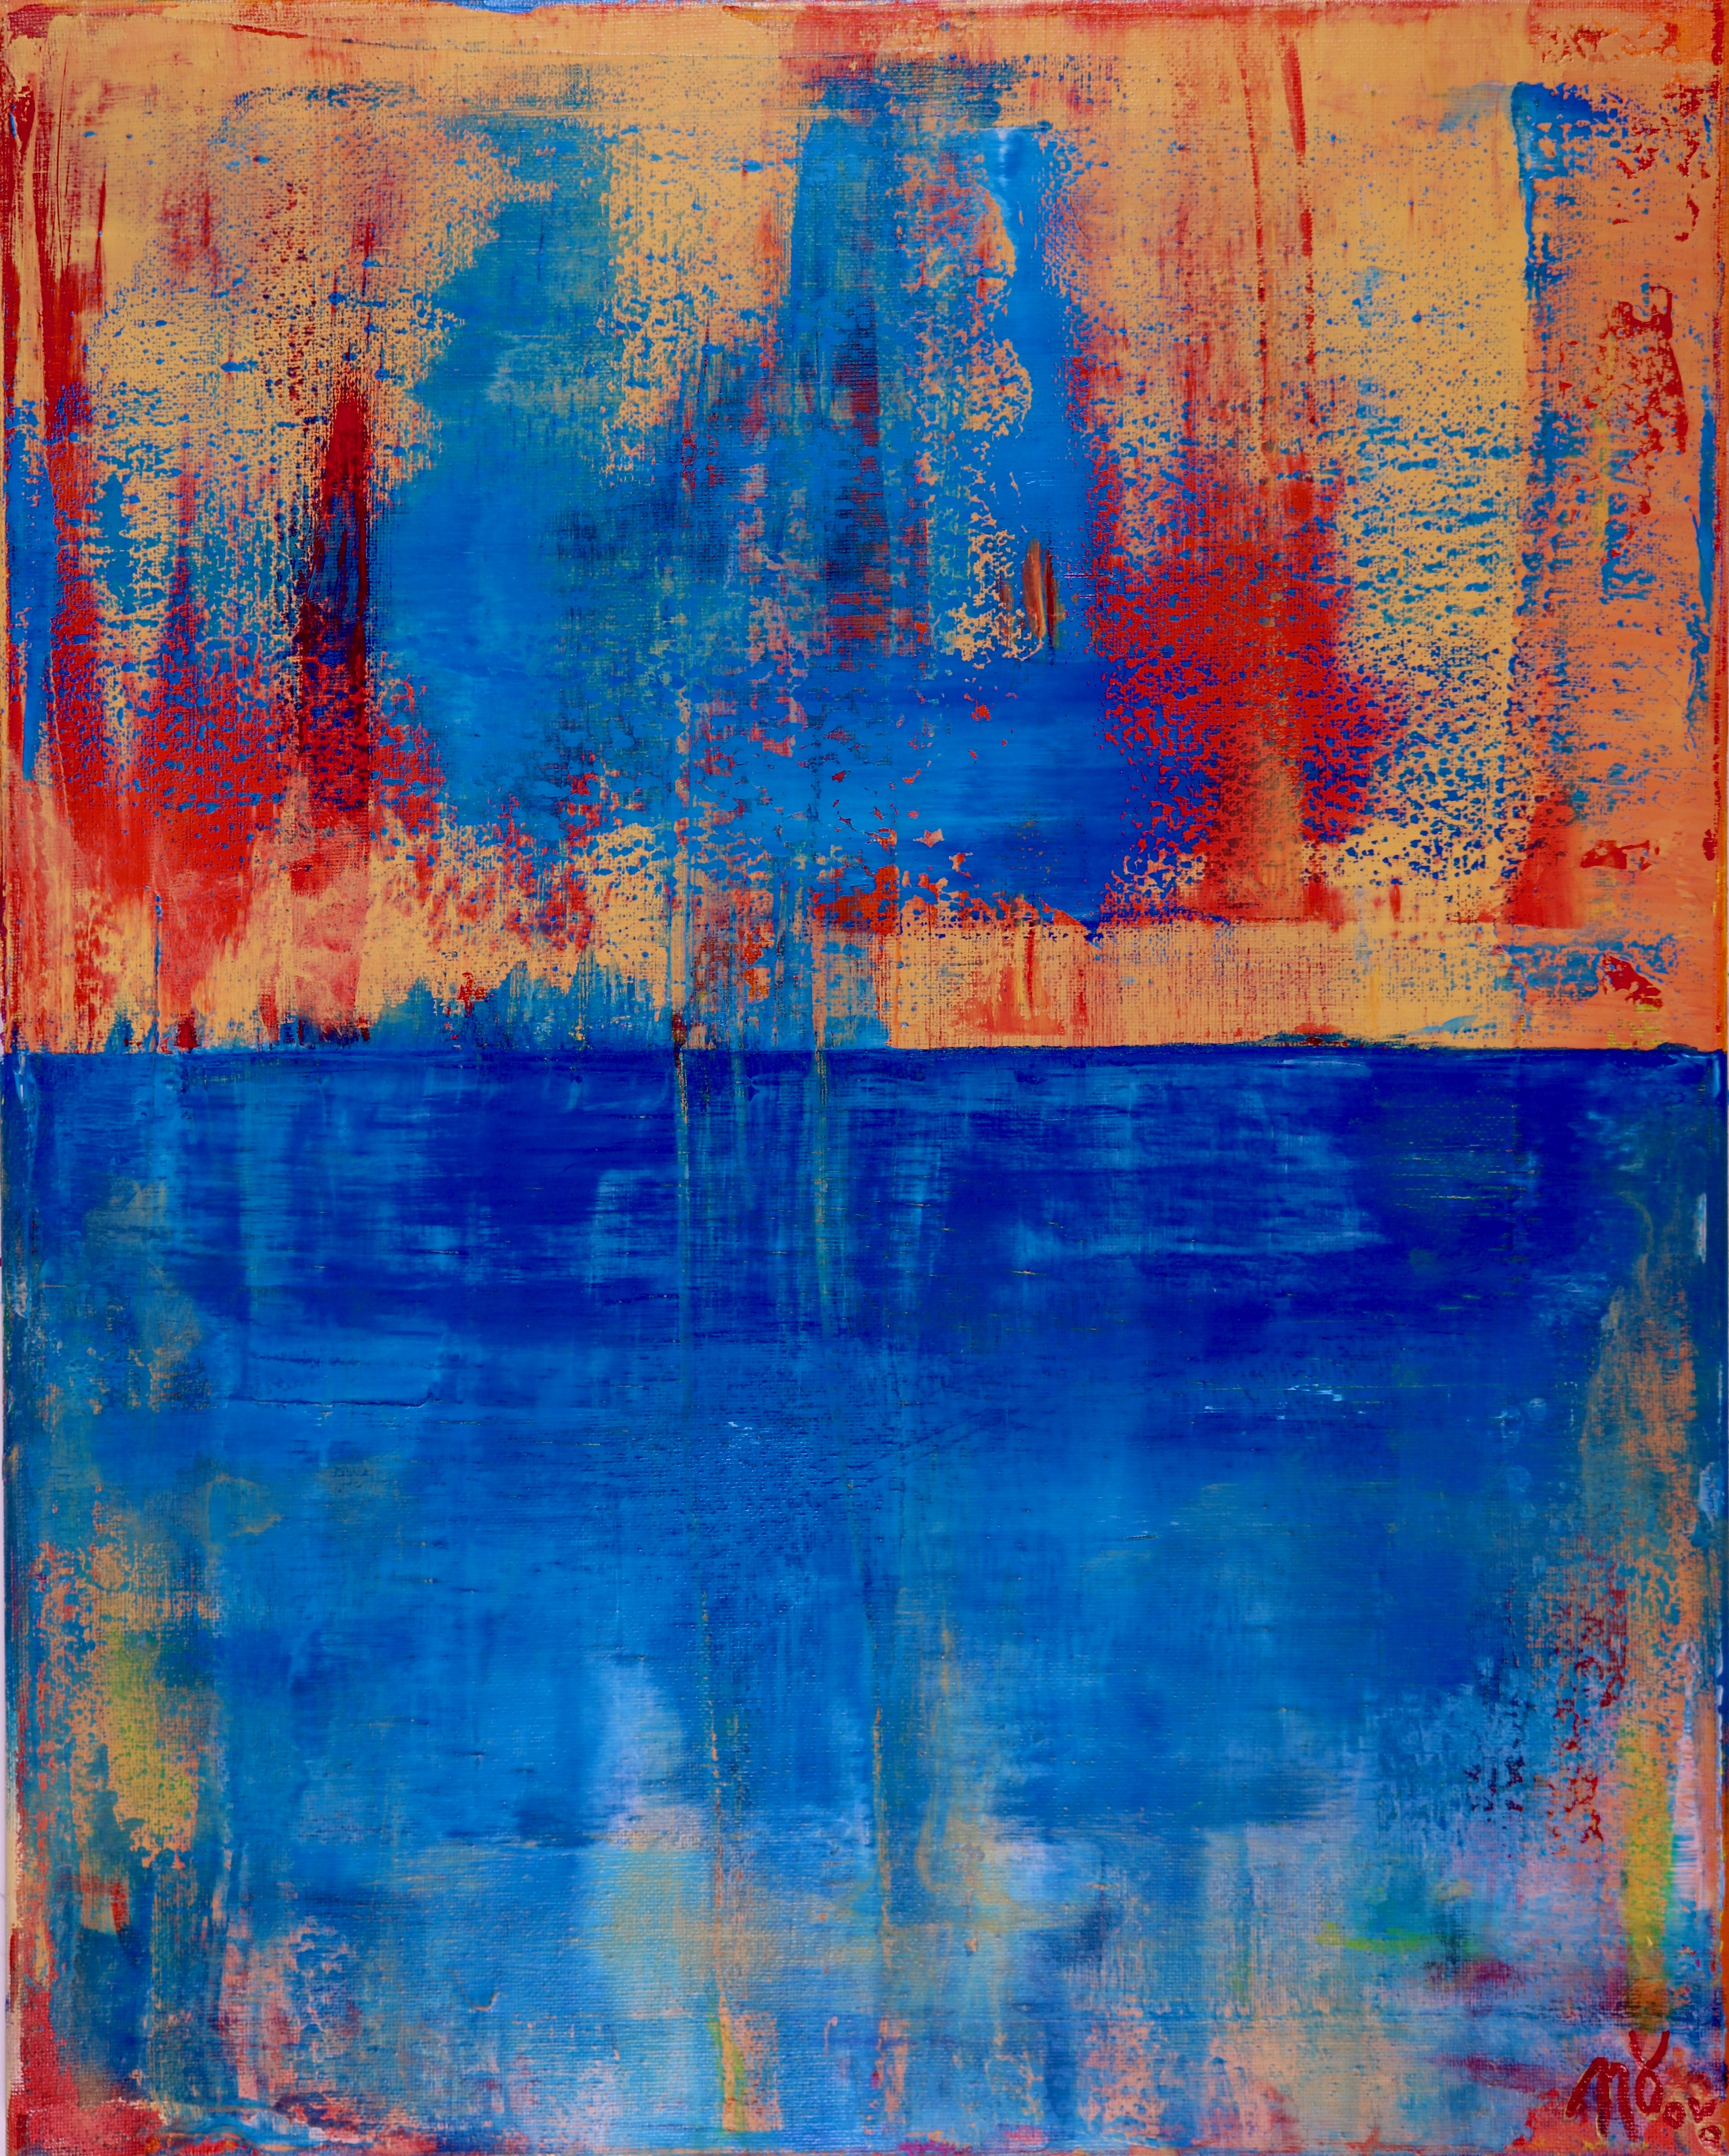 SOLD artwork "Out in the Blue" by abstract artist Nestor Toro, sold to a collector in California